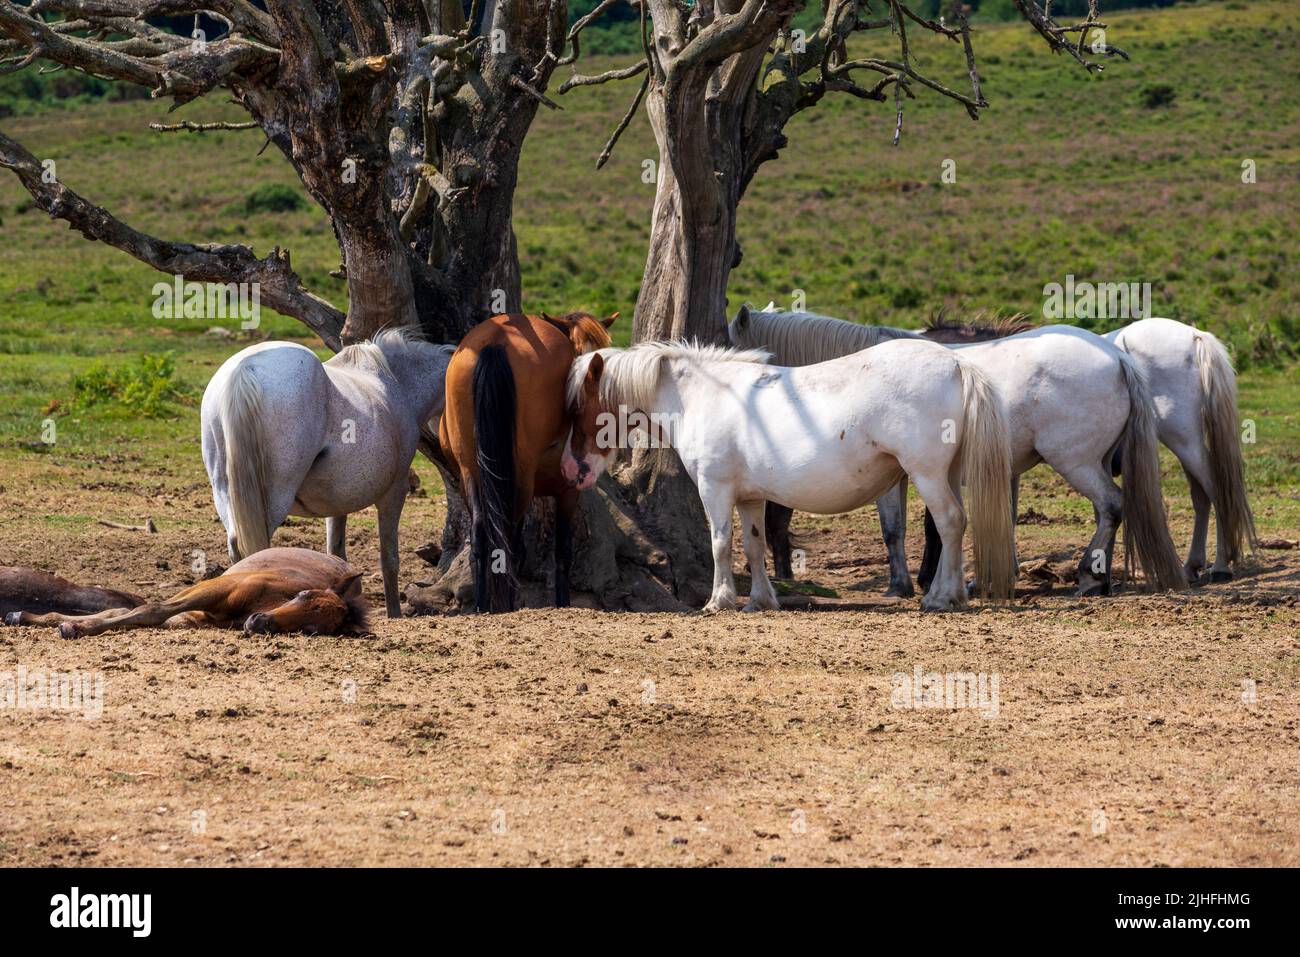 Godshill, Fordingbridge, New Forest, Hampshire, UK, 18th July 2022, Heatwaver: Temperature tops 30 degrees in the midday sun. New Forest ponies rest and conserve energy in a landscape parched by the extreme hot and dry weather. Paul Biggins/Alamy Live News Stock Photo